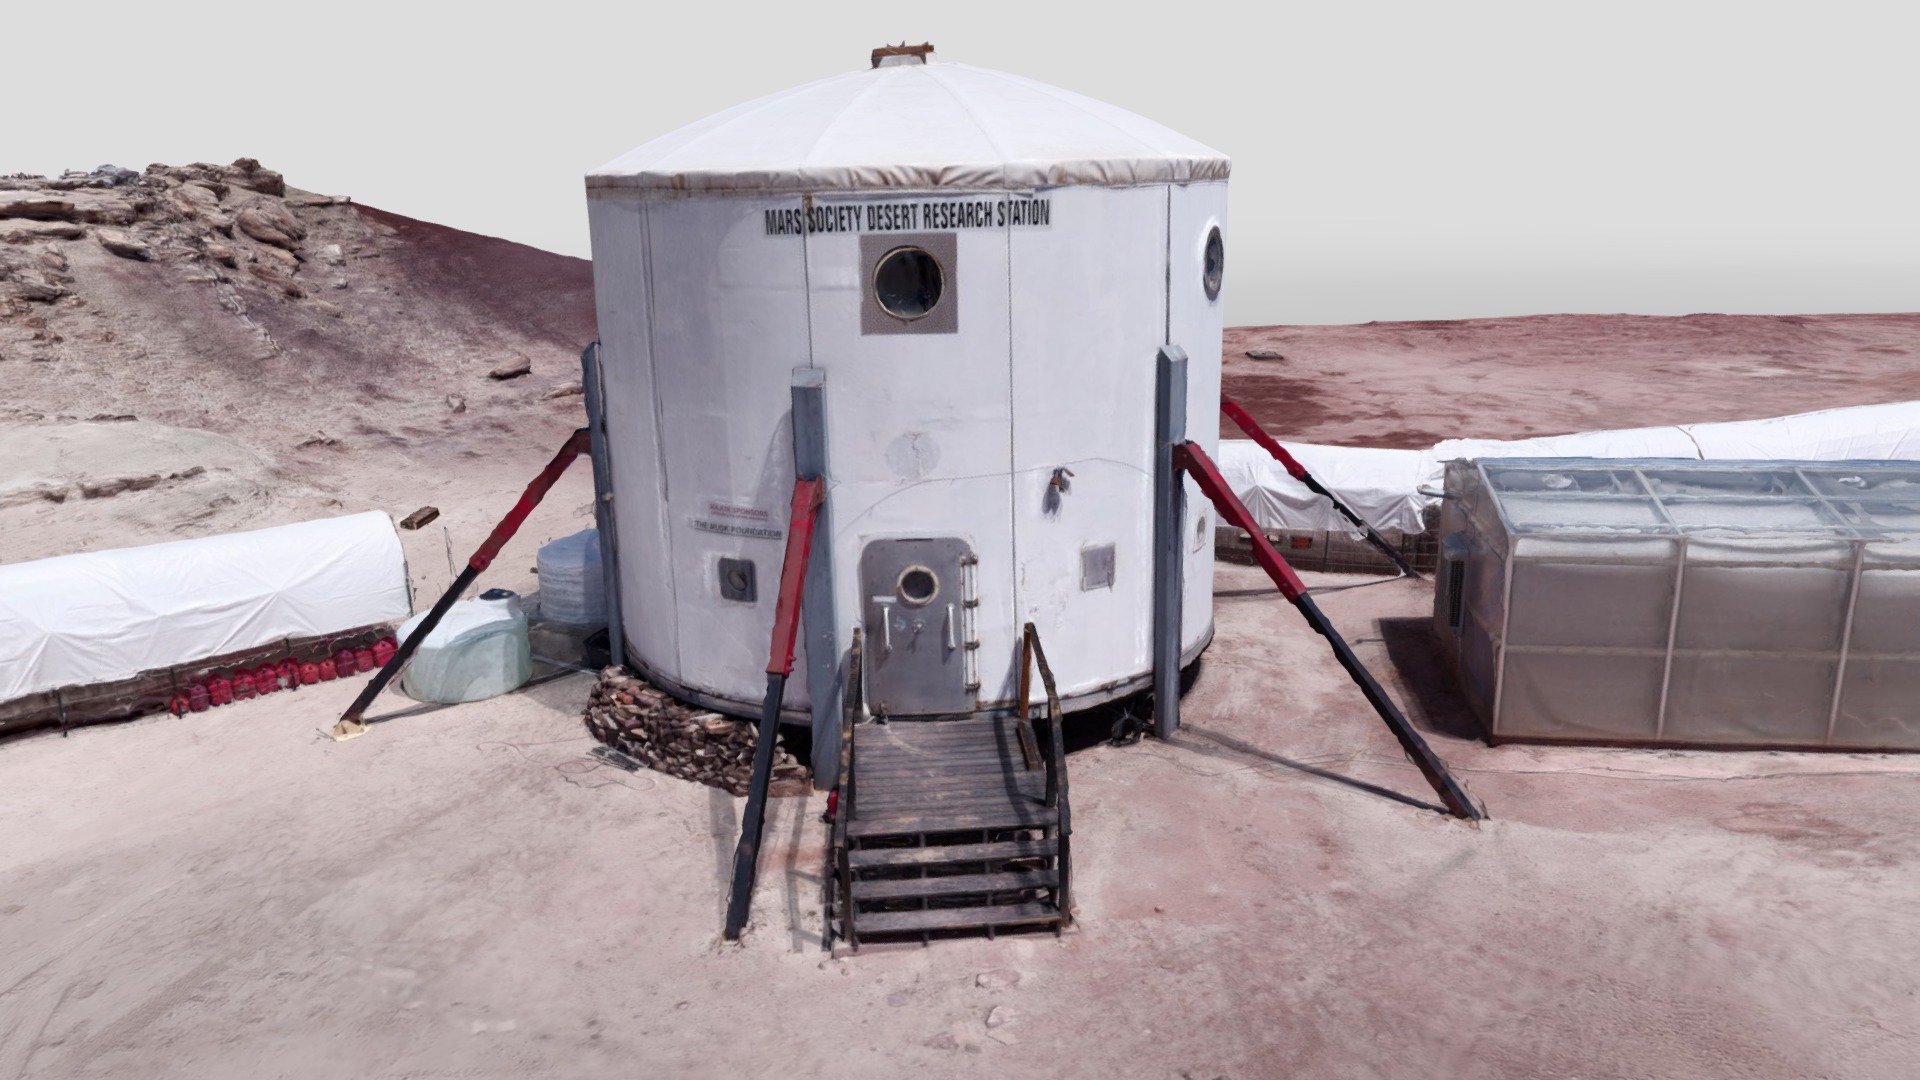 Mars Desert Research Station Exterior 3D model by The Mars Society